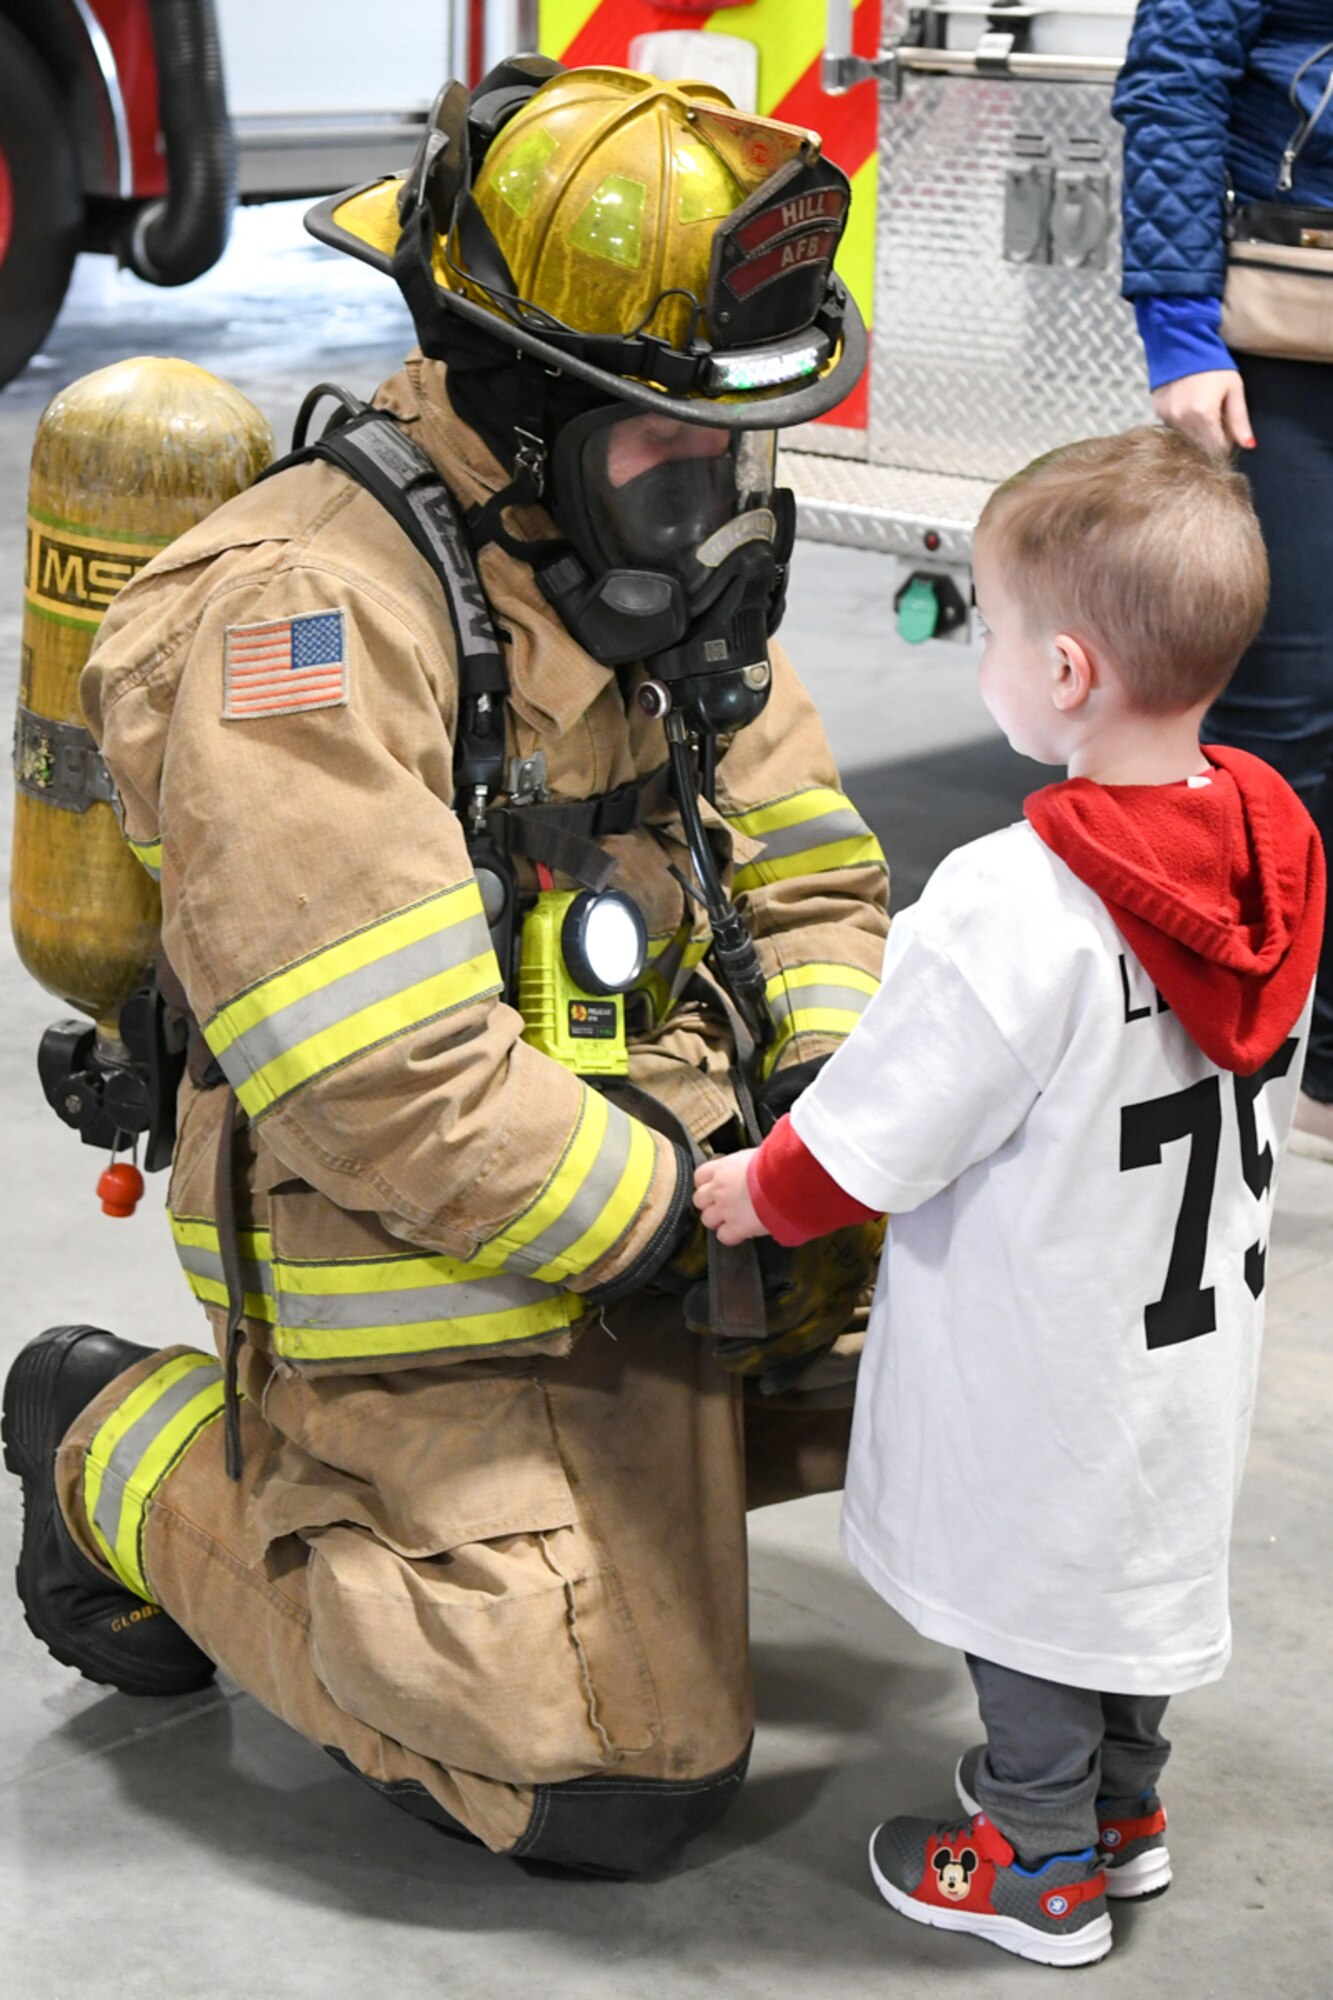 Clark Lenehan greets Duncan Hutchinson, a firefighter with 775th Civil Engineering Squadron, during a visit to the fire department Oct. 11, 2018, at Hill Air Force Base, Utah. The visit was part of a 75th Air Base Wing-hosted base tour for Make-A-Wish Utah children and their families. (U.S. Air Force photo by Cynthia Griggs)